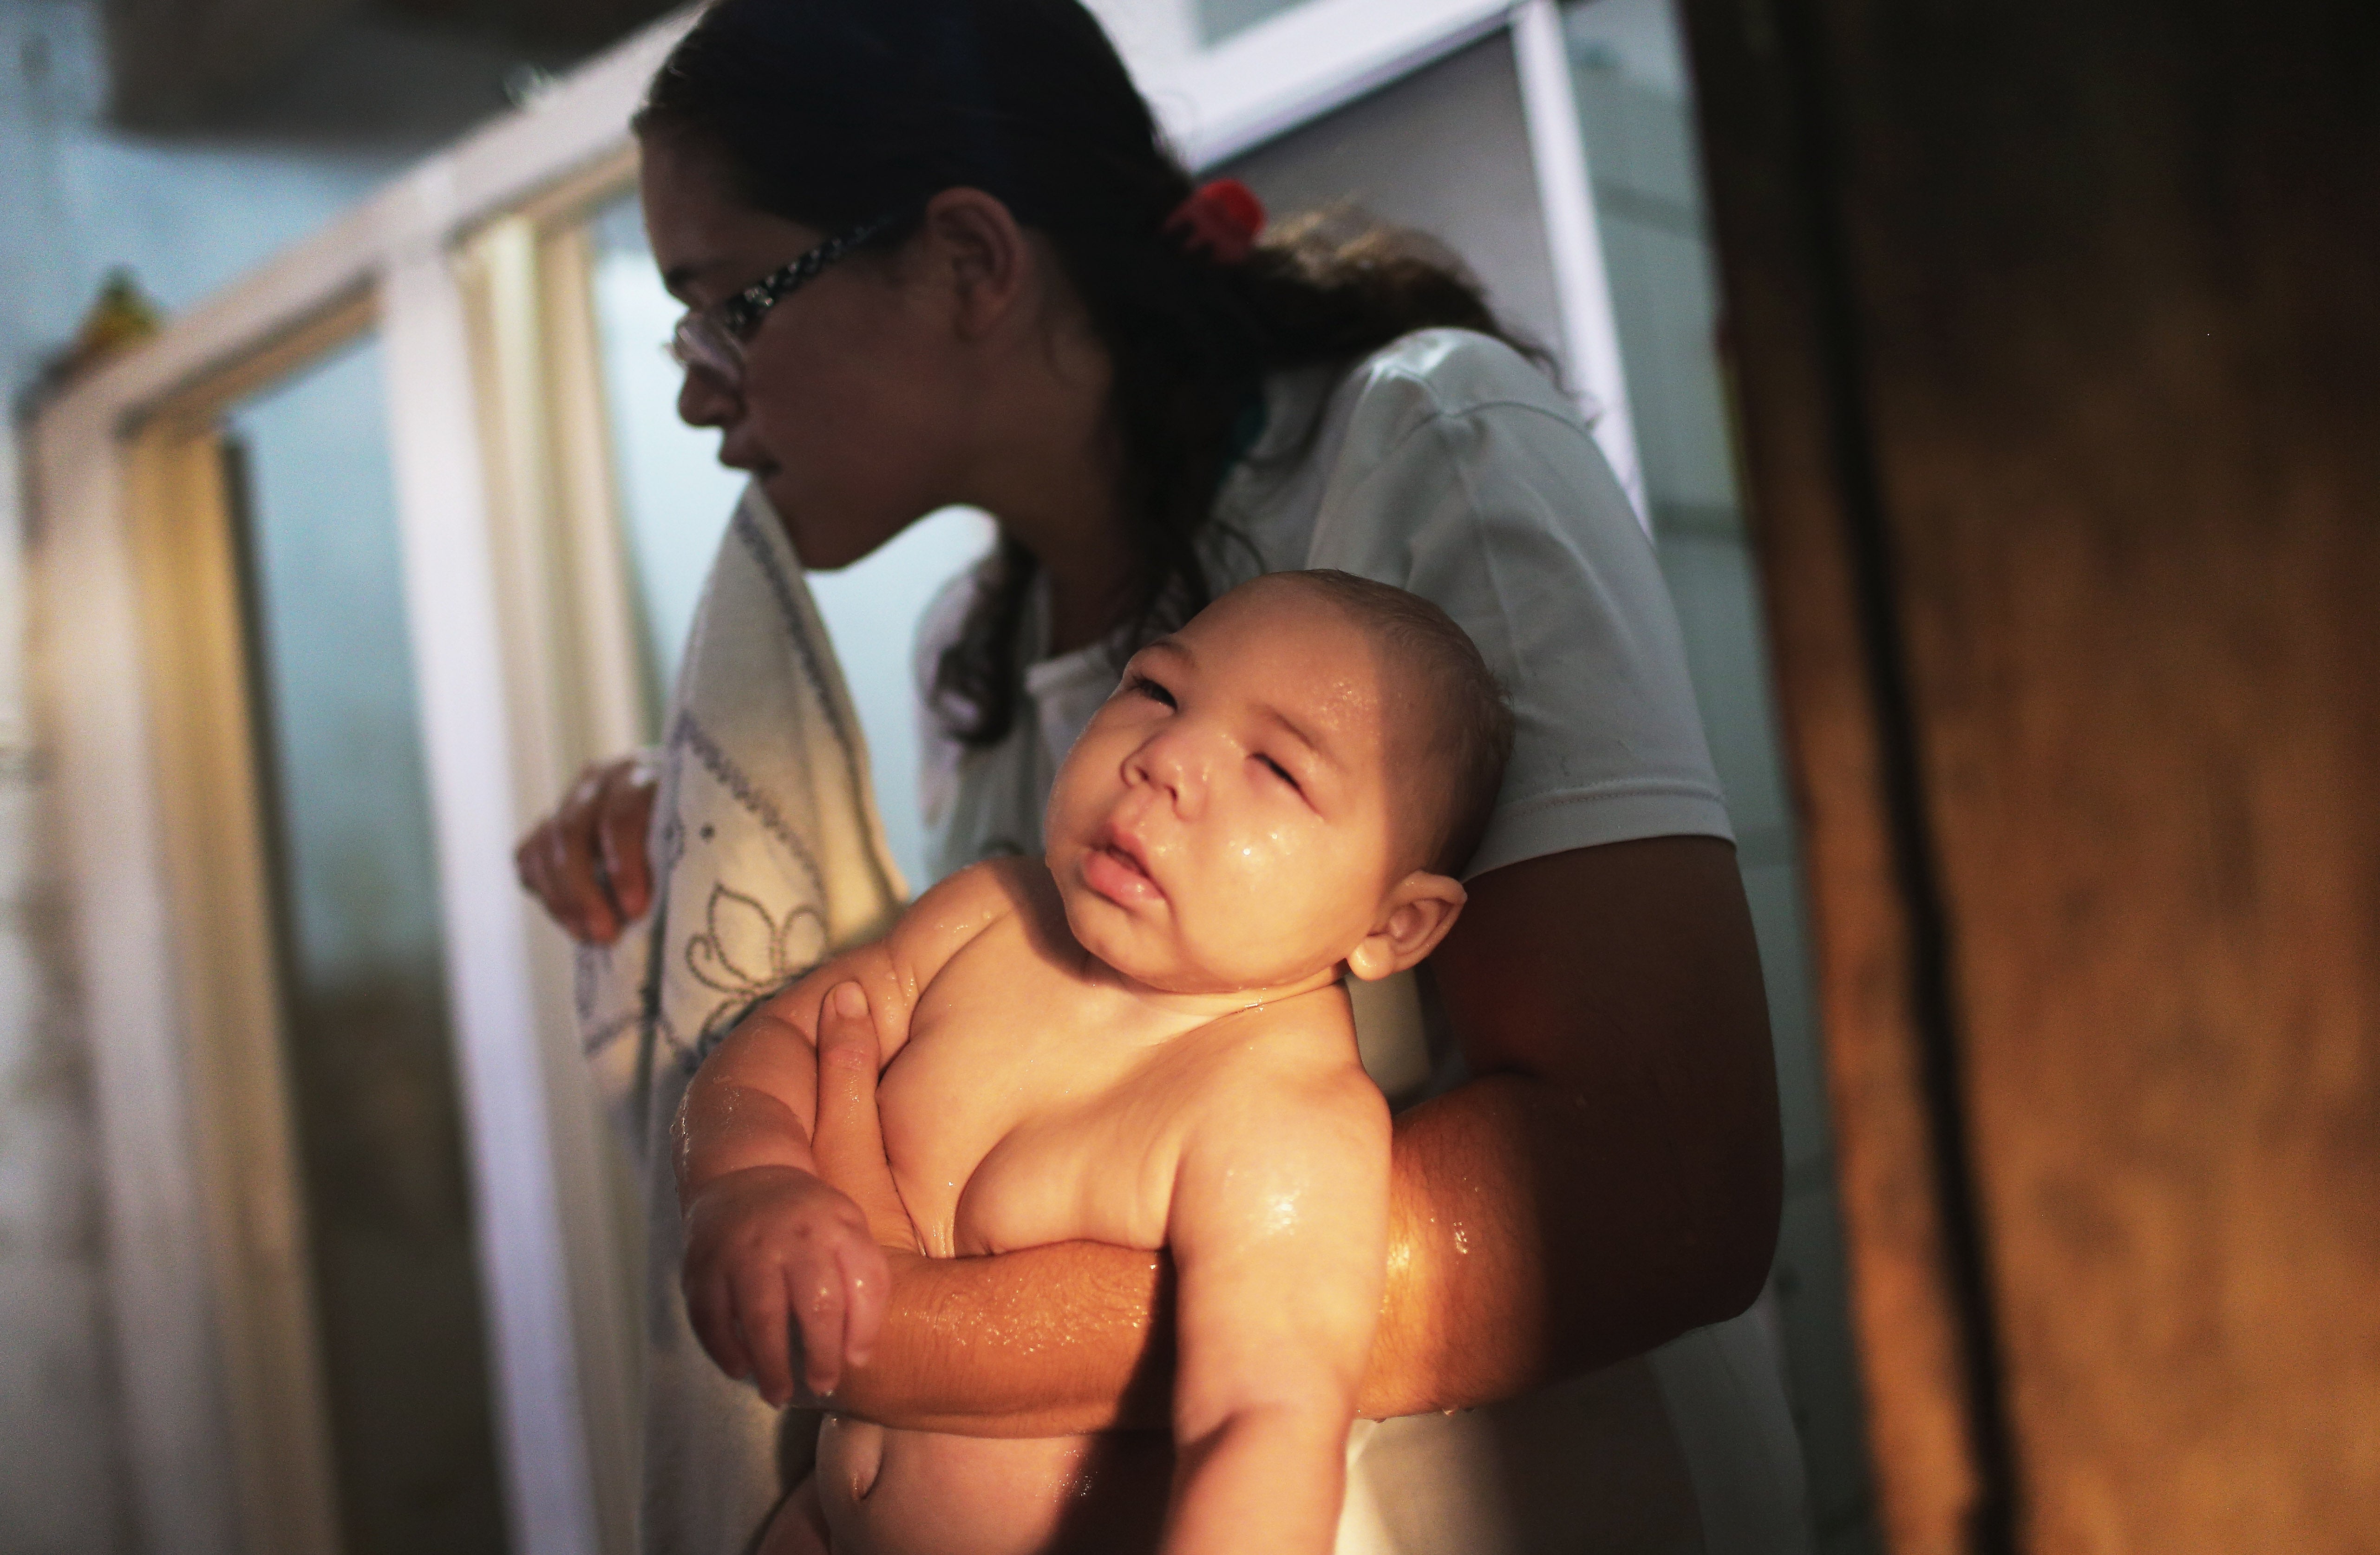 &#13;
A five-months-old baby, who has microcephaly, on 25 January 2016 in Recife, Brazil.&#13;